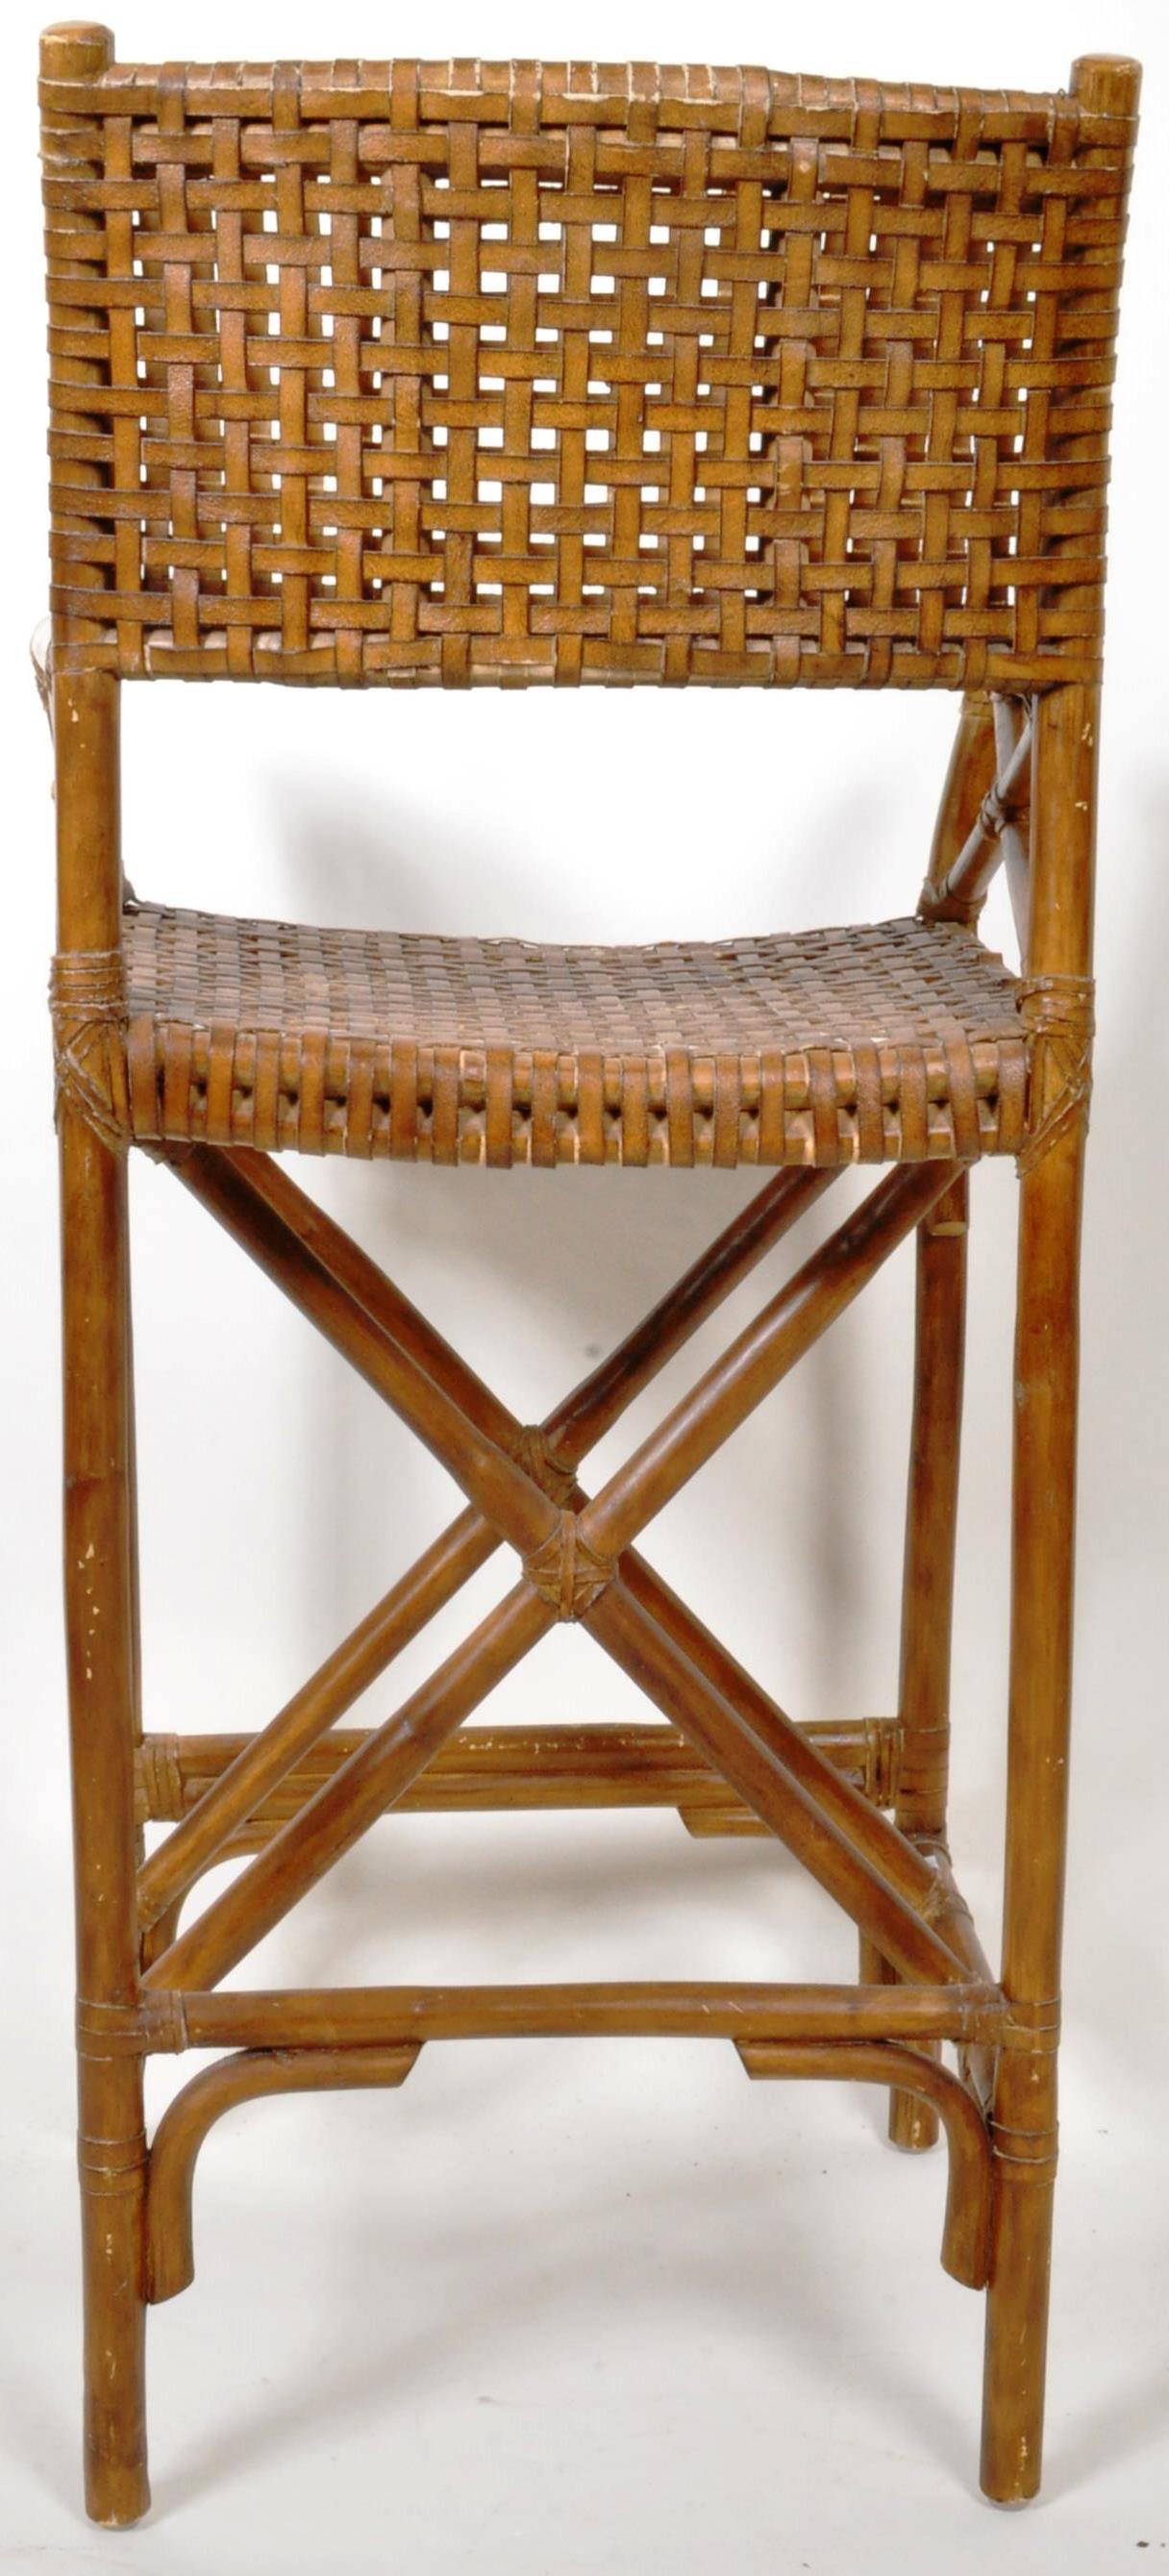 RETRO VINTAGE 1960'S CANE & BAMBOO UMPIRES SEAT TALL CHAIR - Image 6 of 6